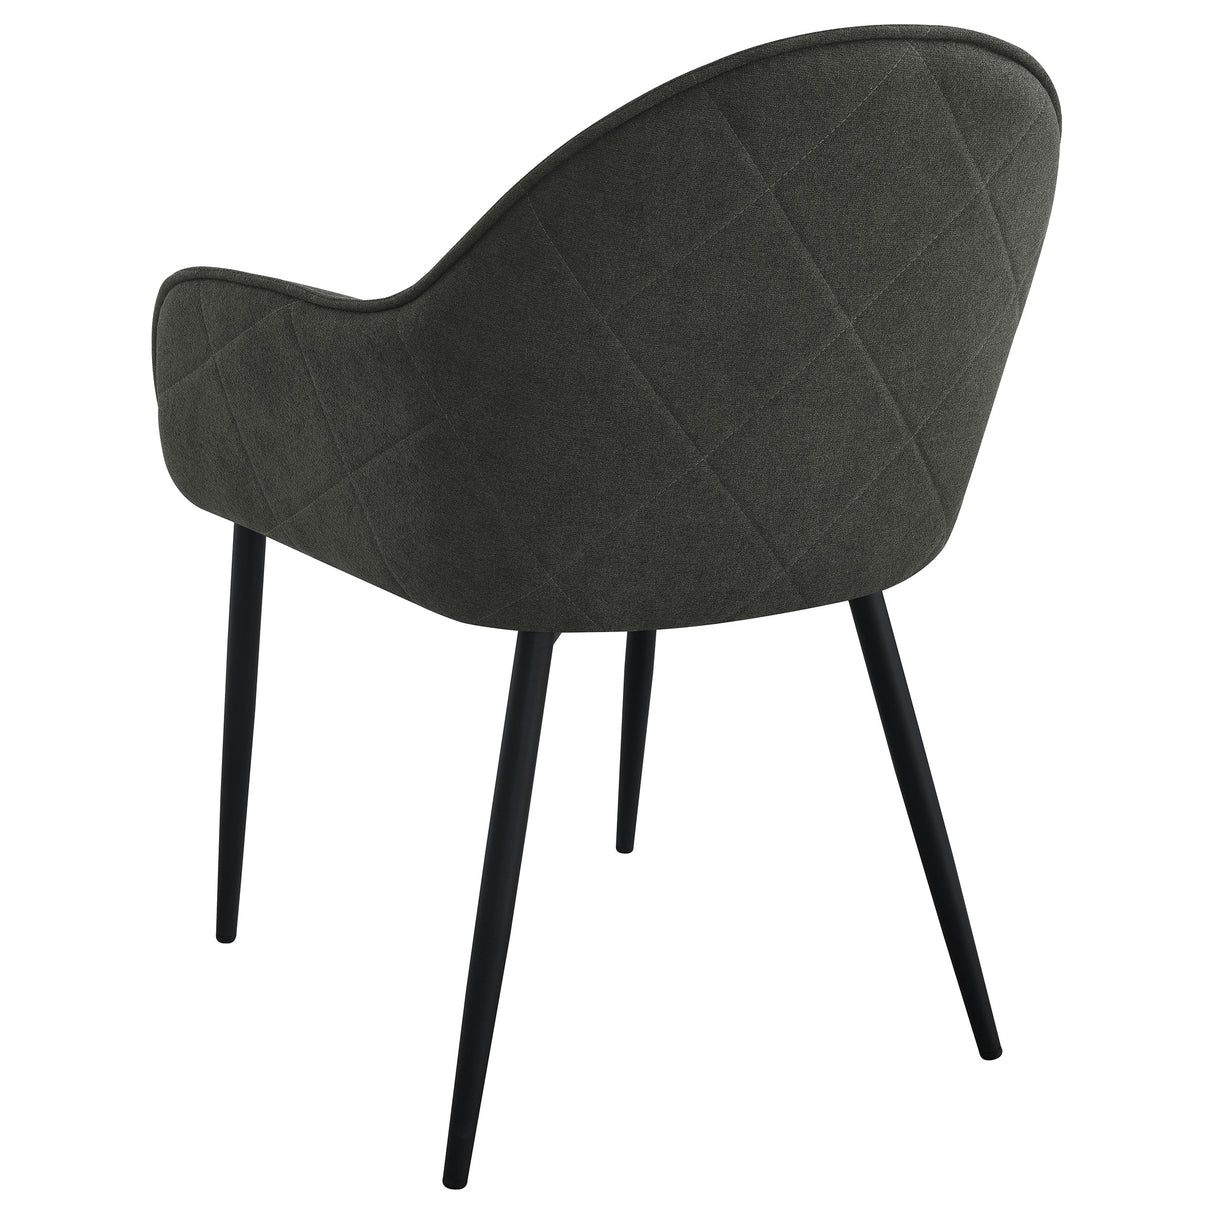 Arm Chair - Emma Upholstered Dining Arm Chair Charcoal and Black (Set of 2)